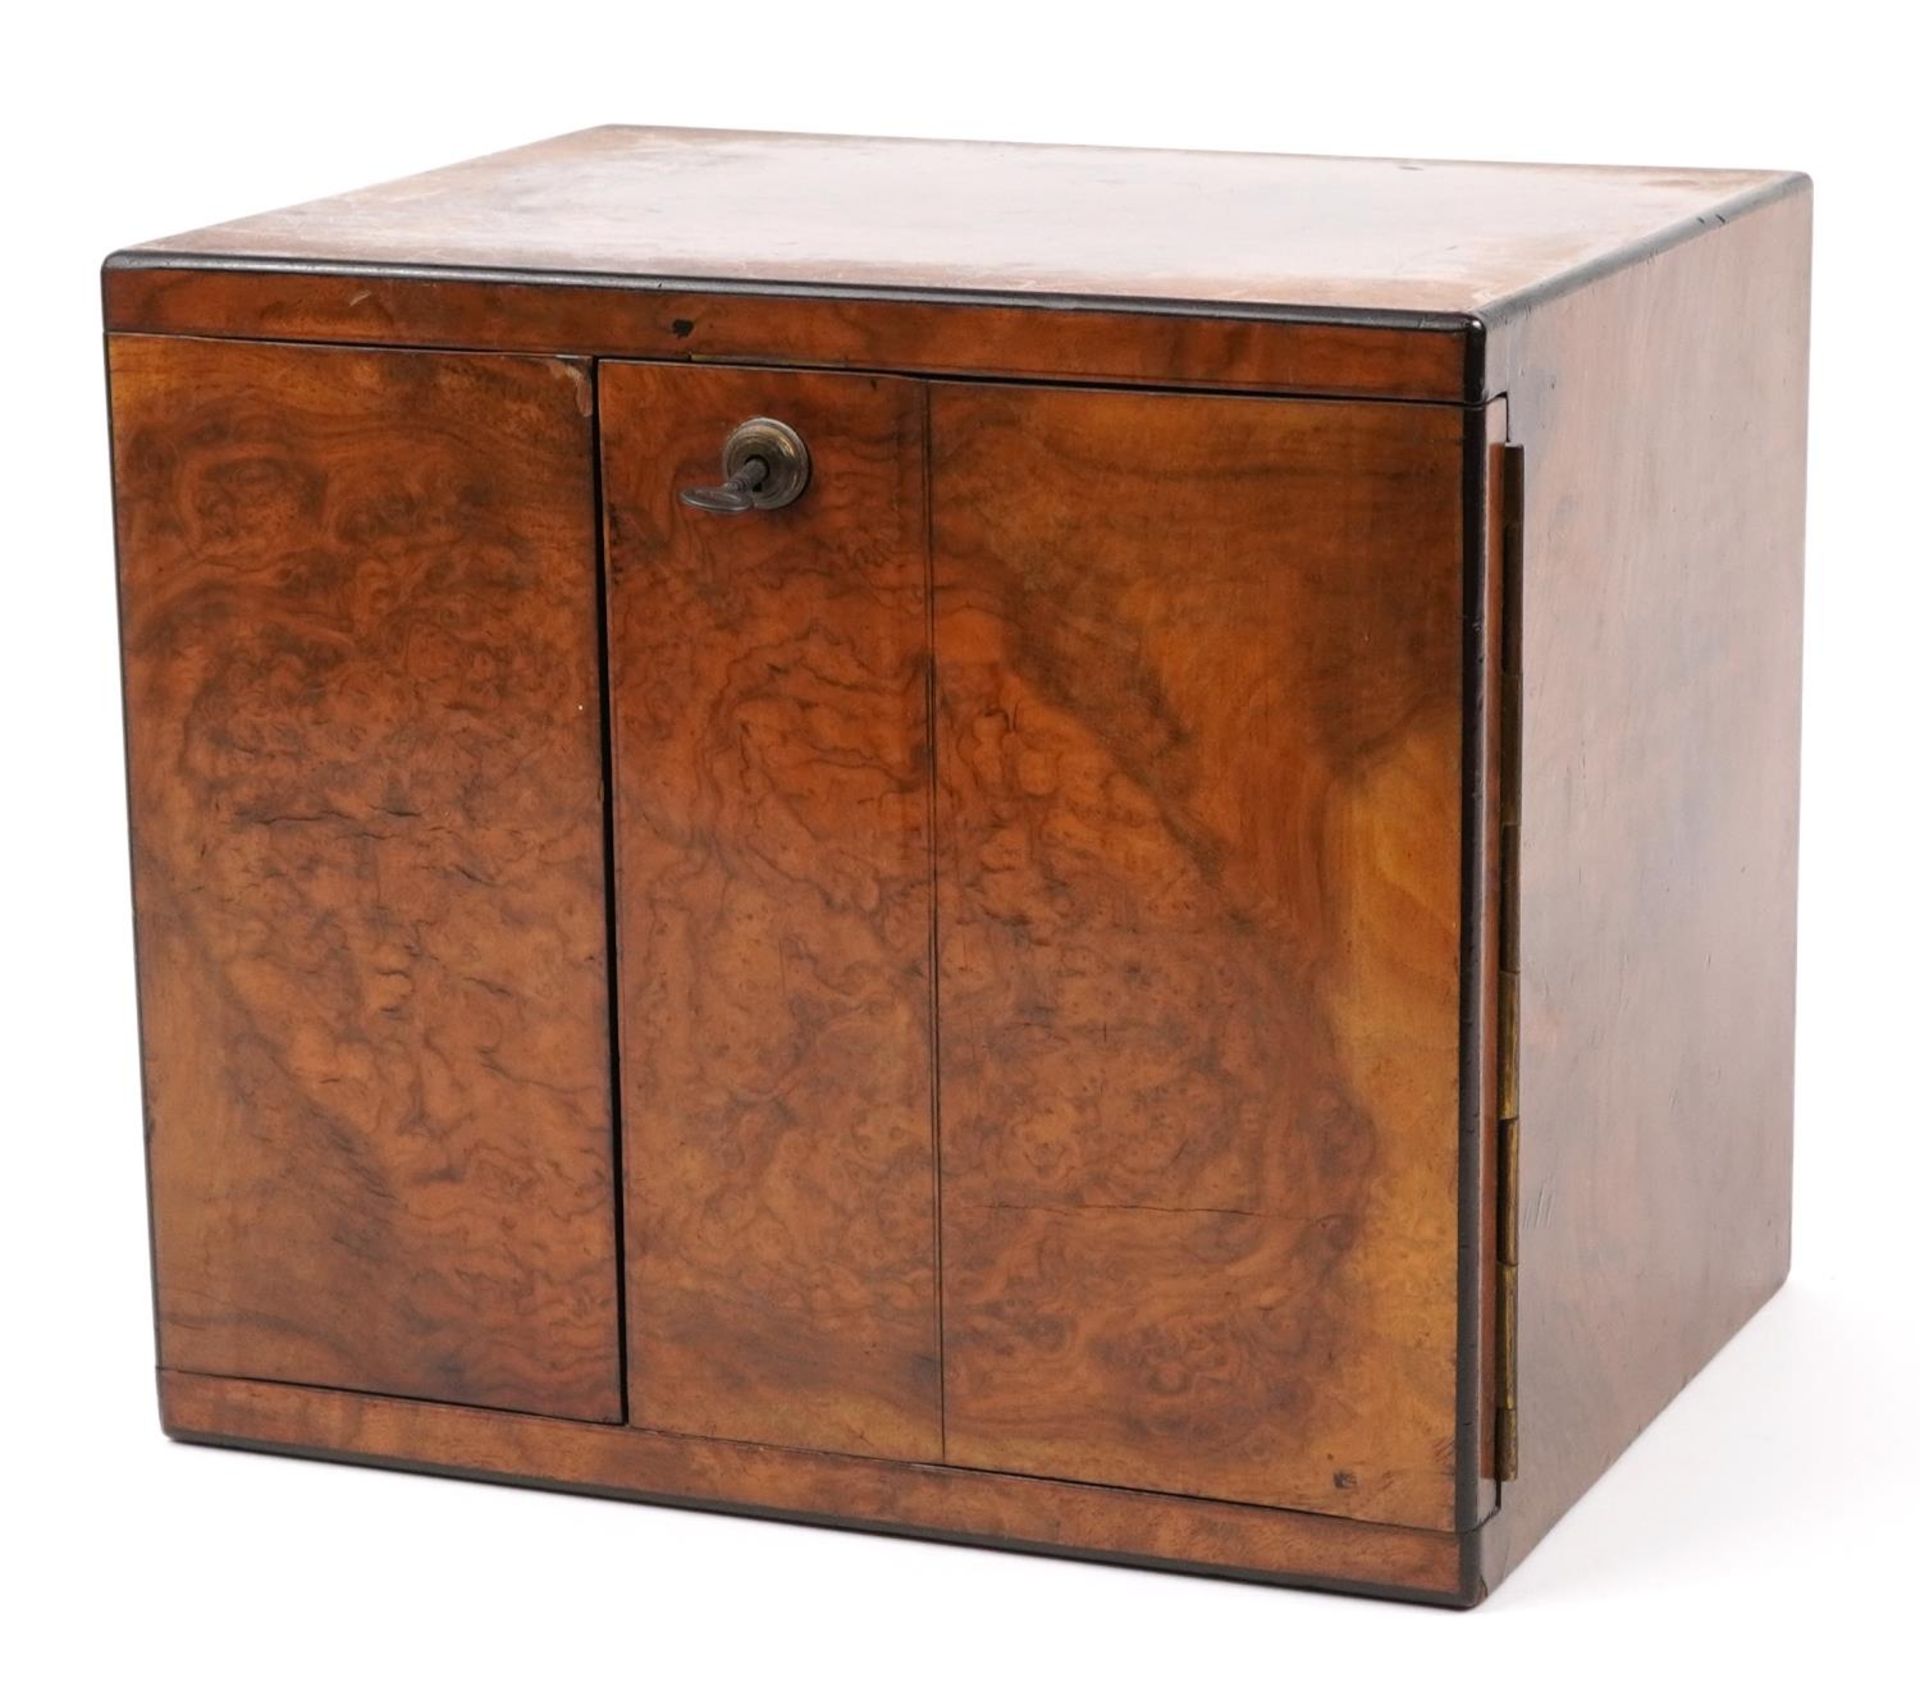 Victorian burr walnut campaign style cigar chest with opening front enclosing two drawers with inset